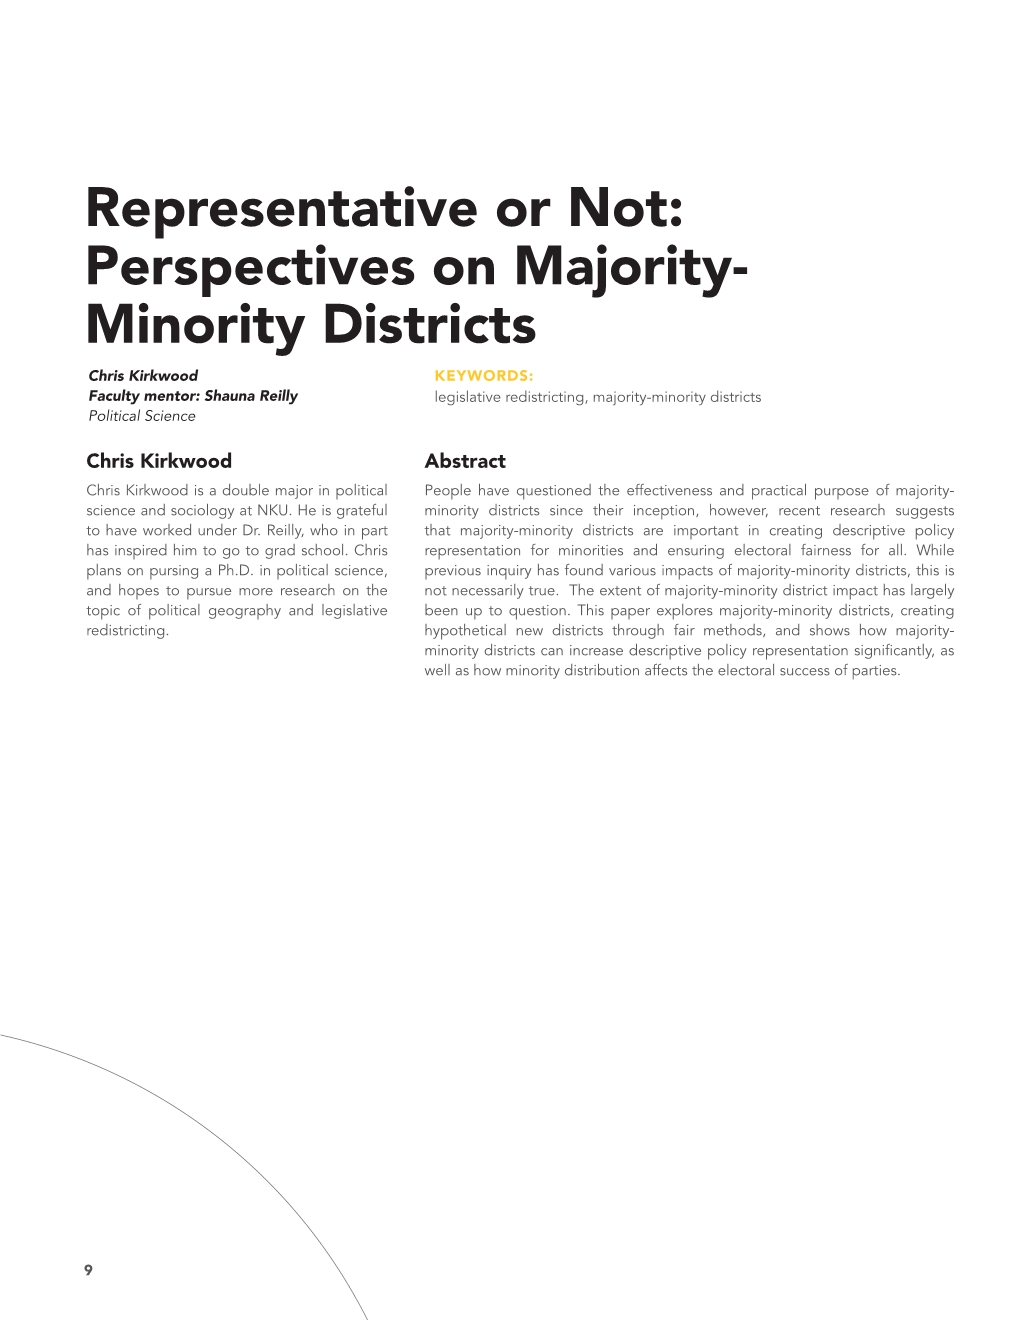 Representative Or Not: Perspectives on Majority- Minority Districts